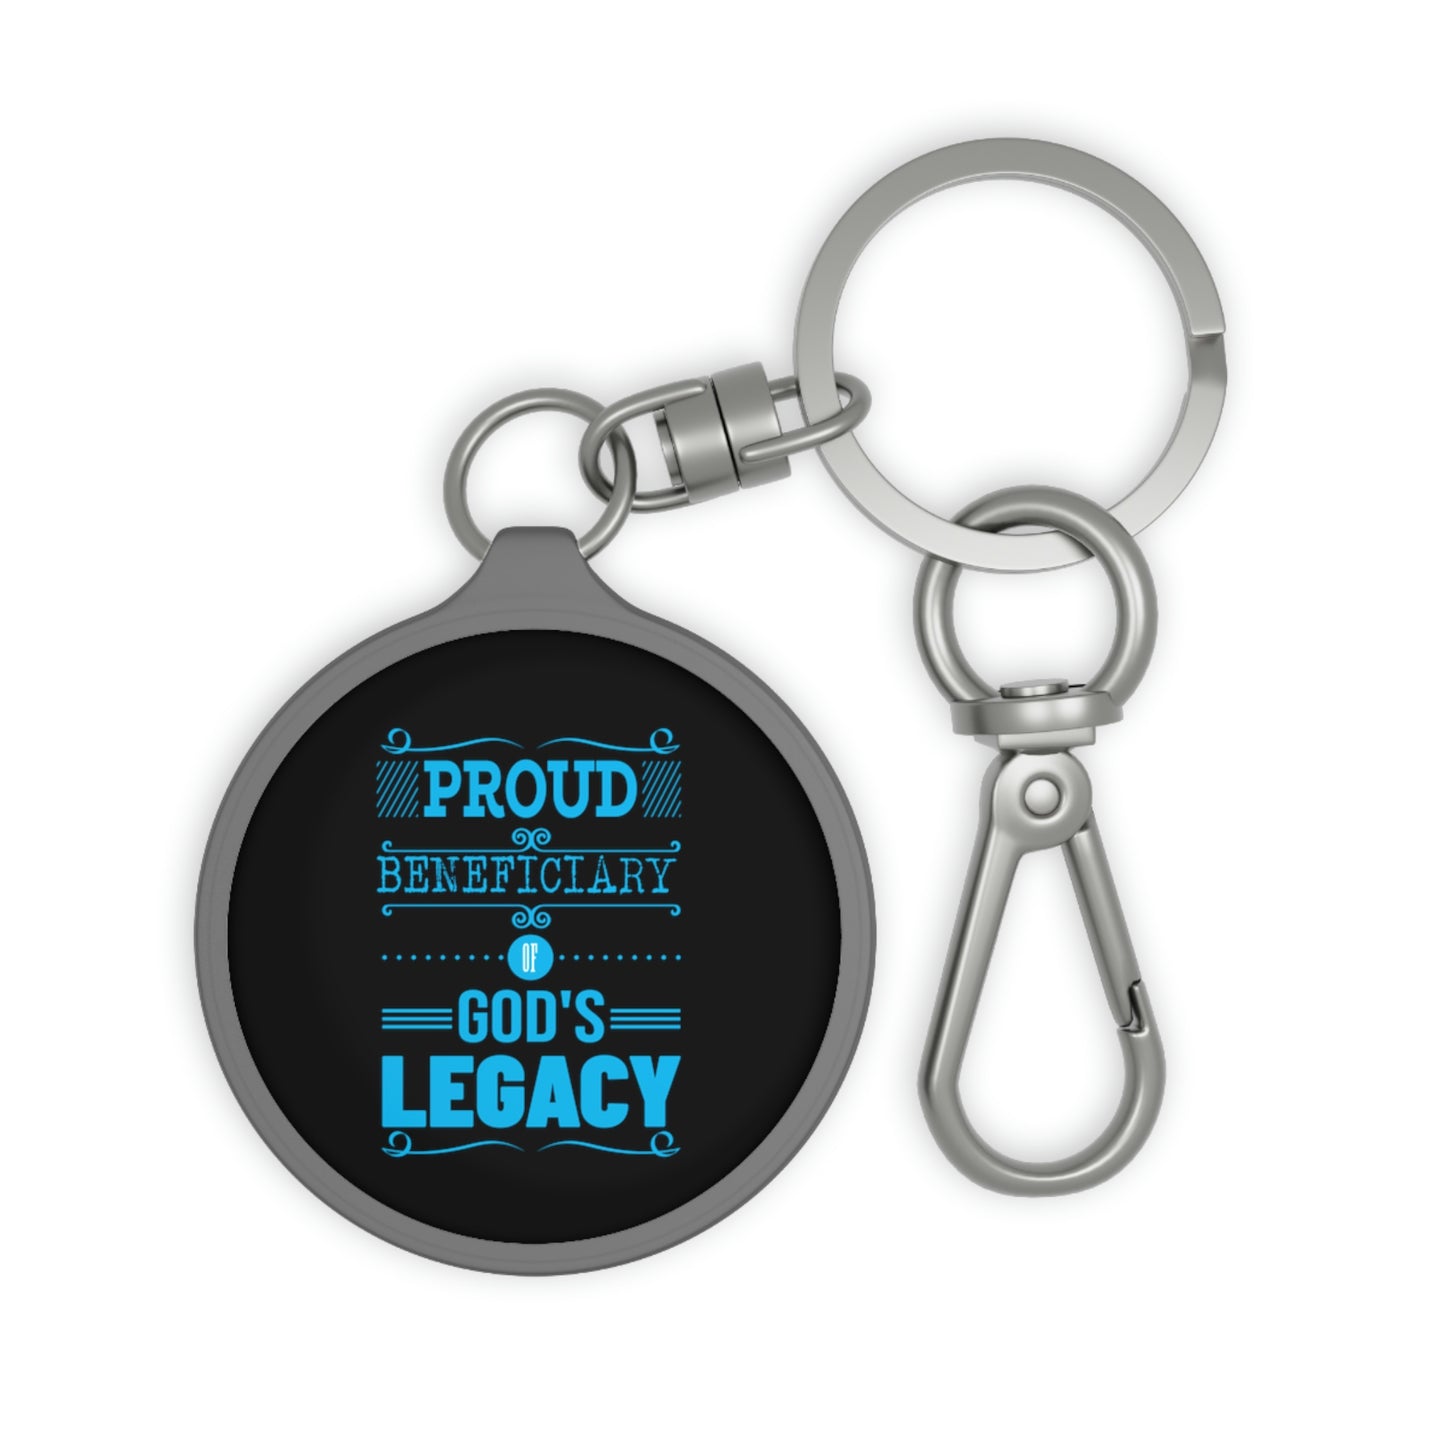 Proud Beneficiary Of God's Legacy Key Fob